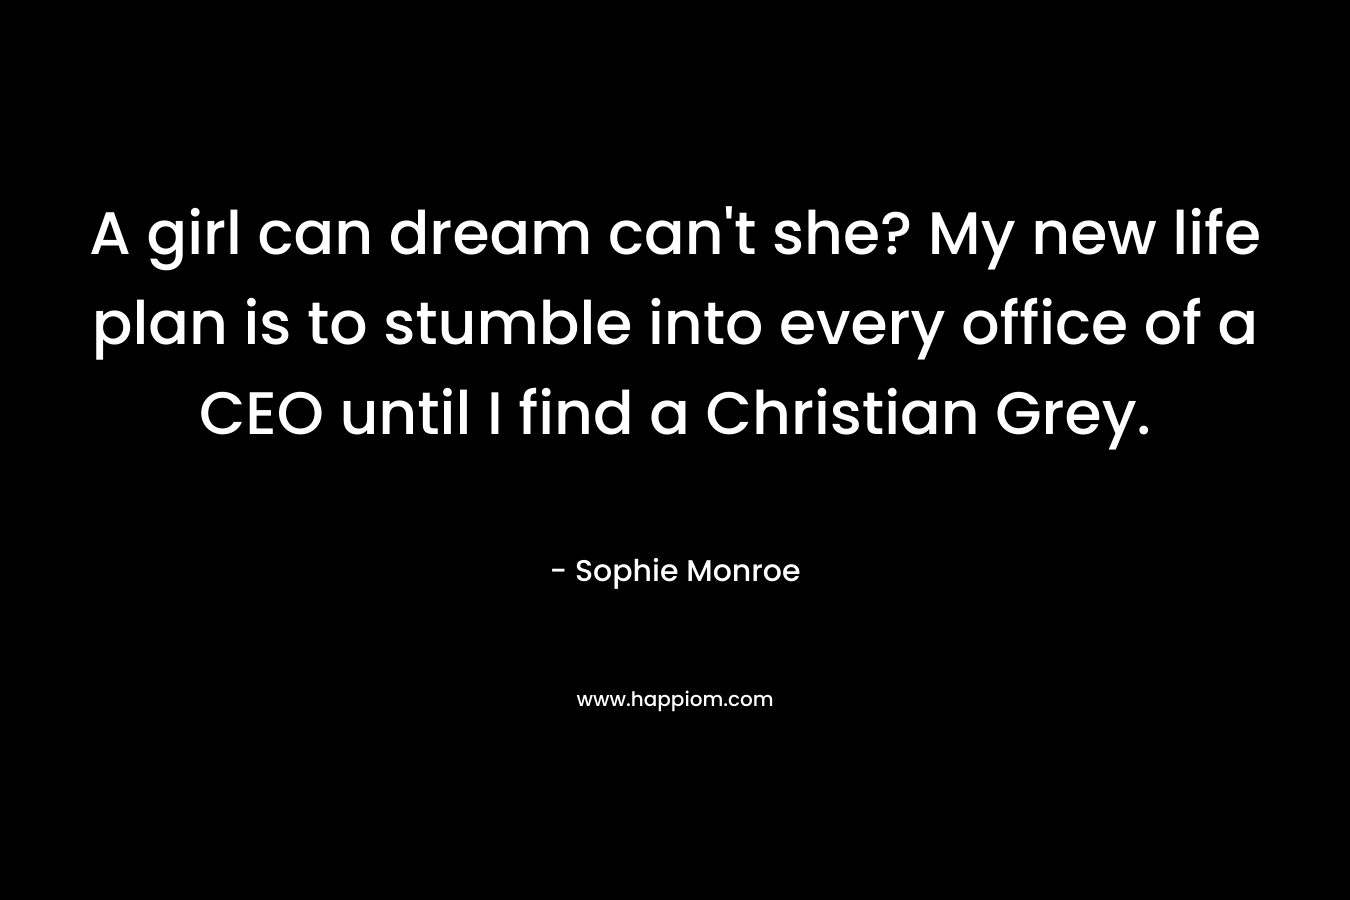 A girl can dream can't she? My new life plan is to stumble into every office of a CEO until I find a Christian Grey.